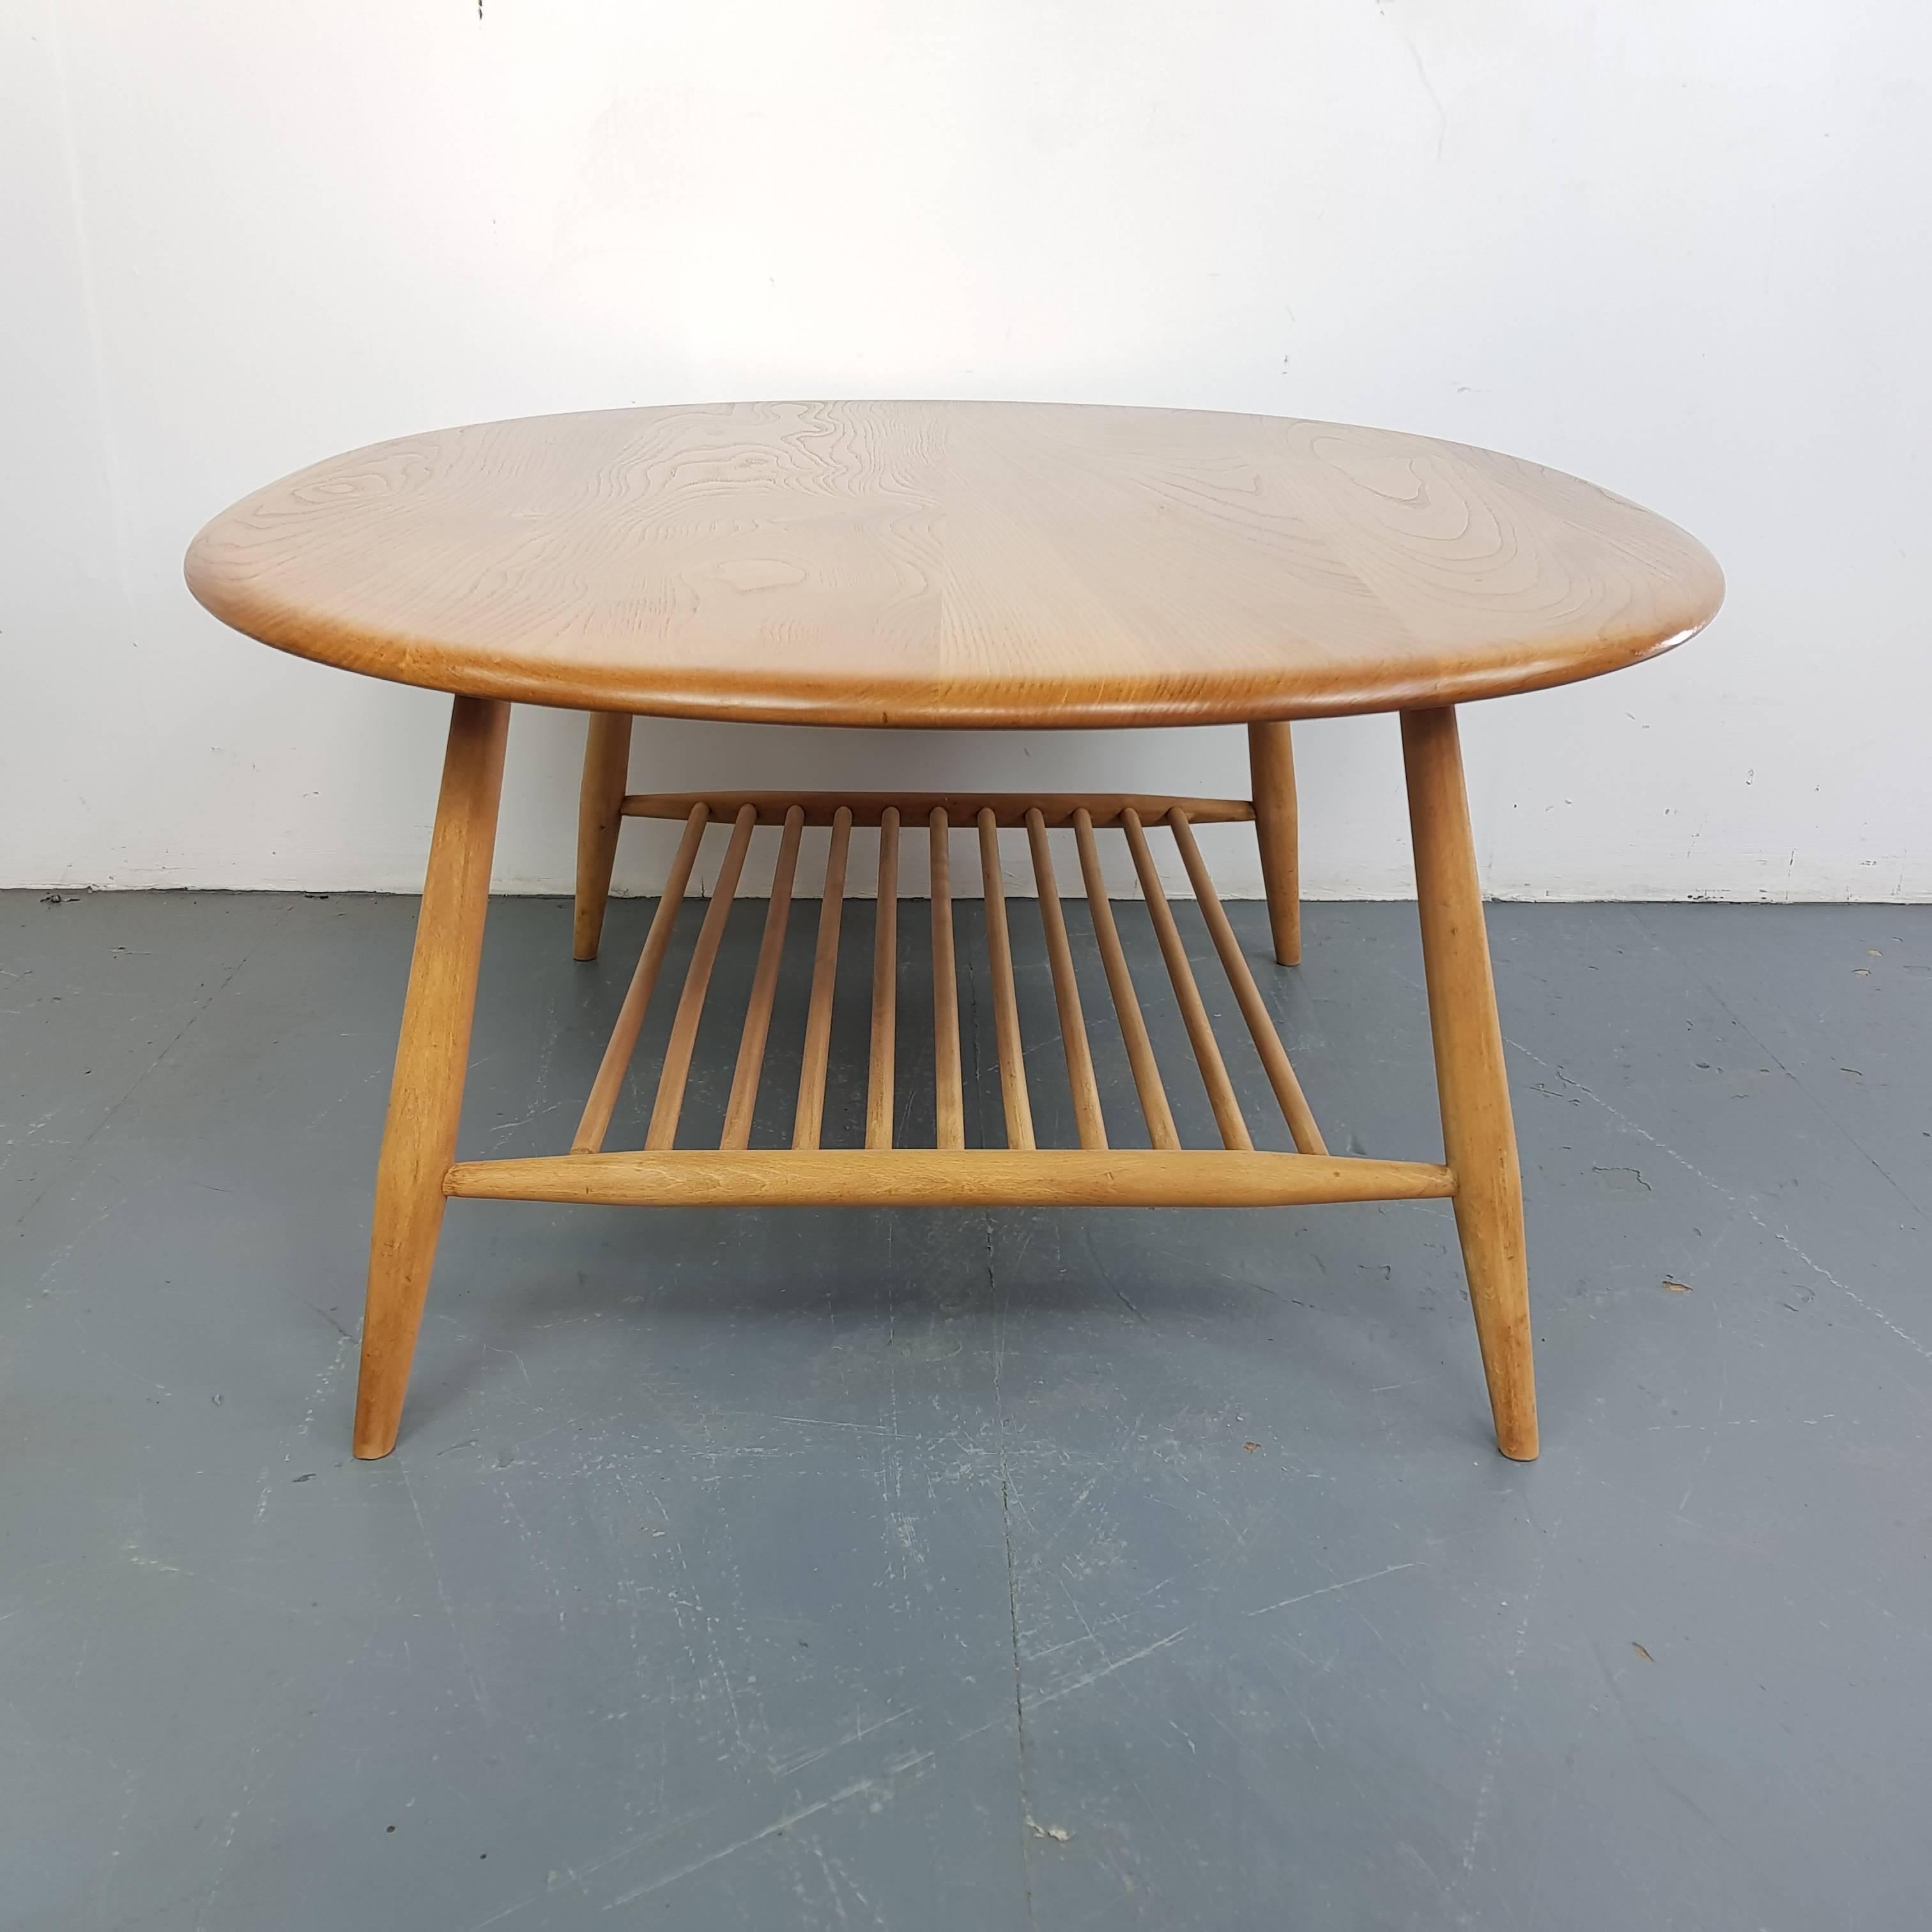 Lovely vintage coffee table designed by Lucian Ercolani, with tapered legs and a magazine shelf underneath. Elm and beech.

In good vintage condition, with some wear commensurate with age and use, but nothing specific to mention.

Approximate